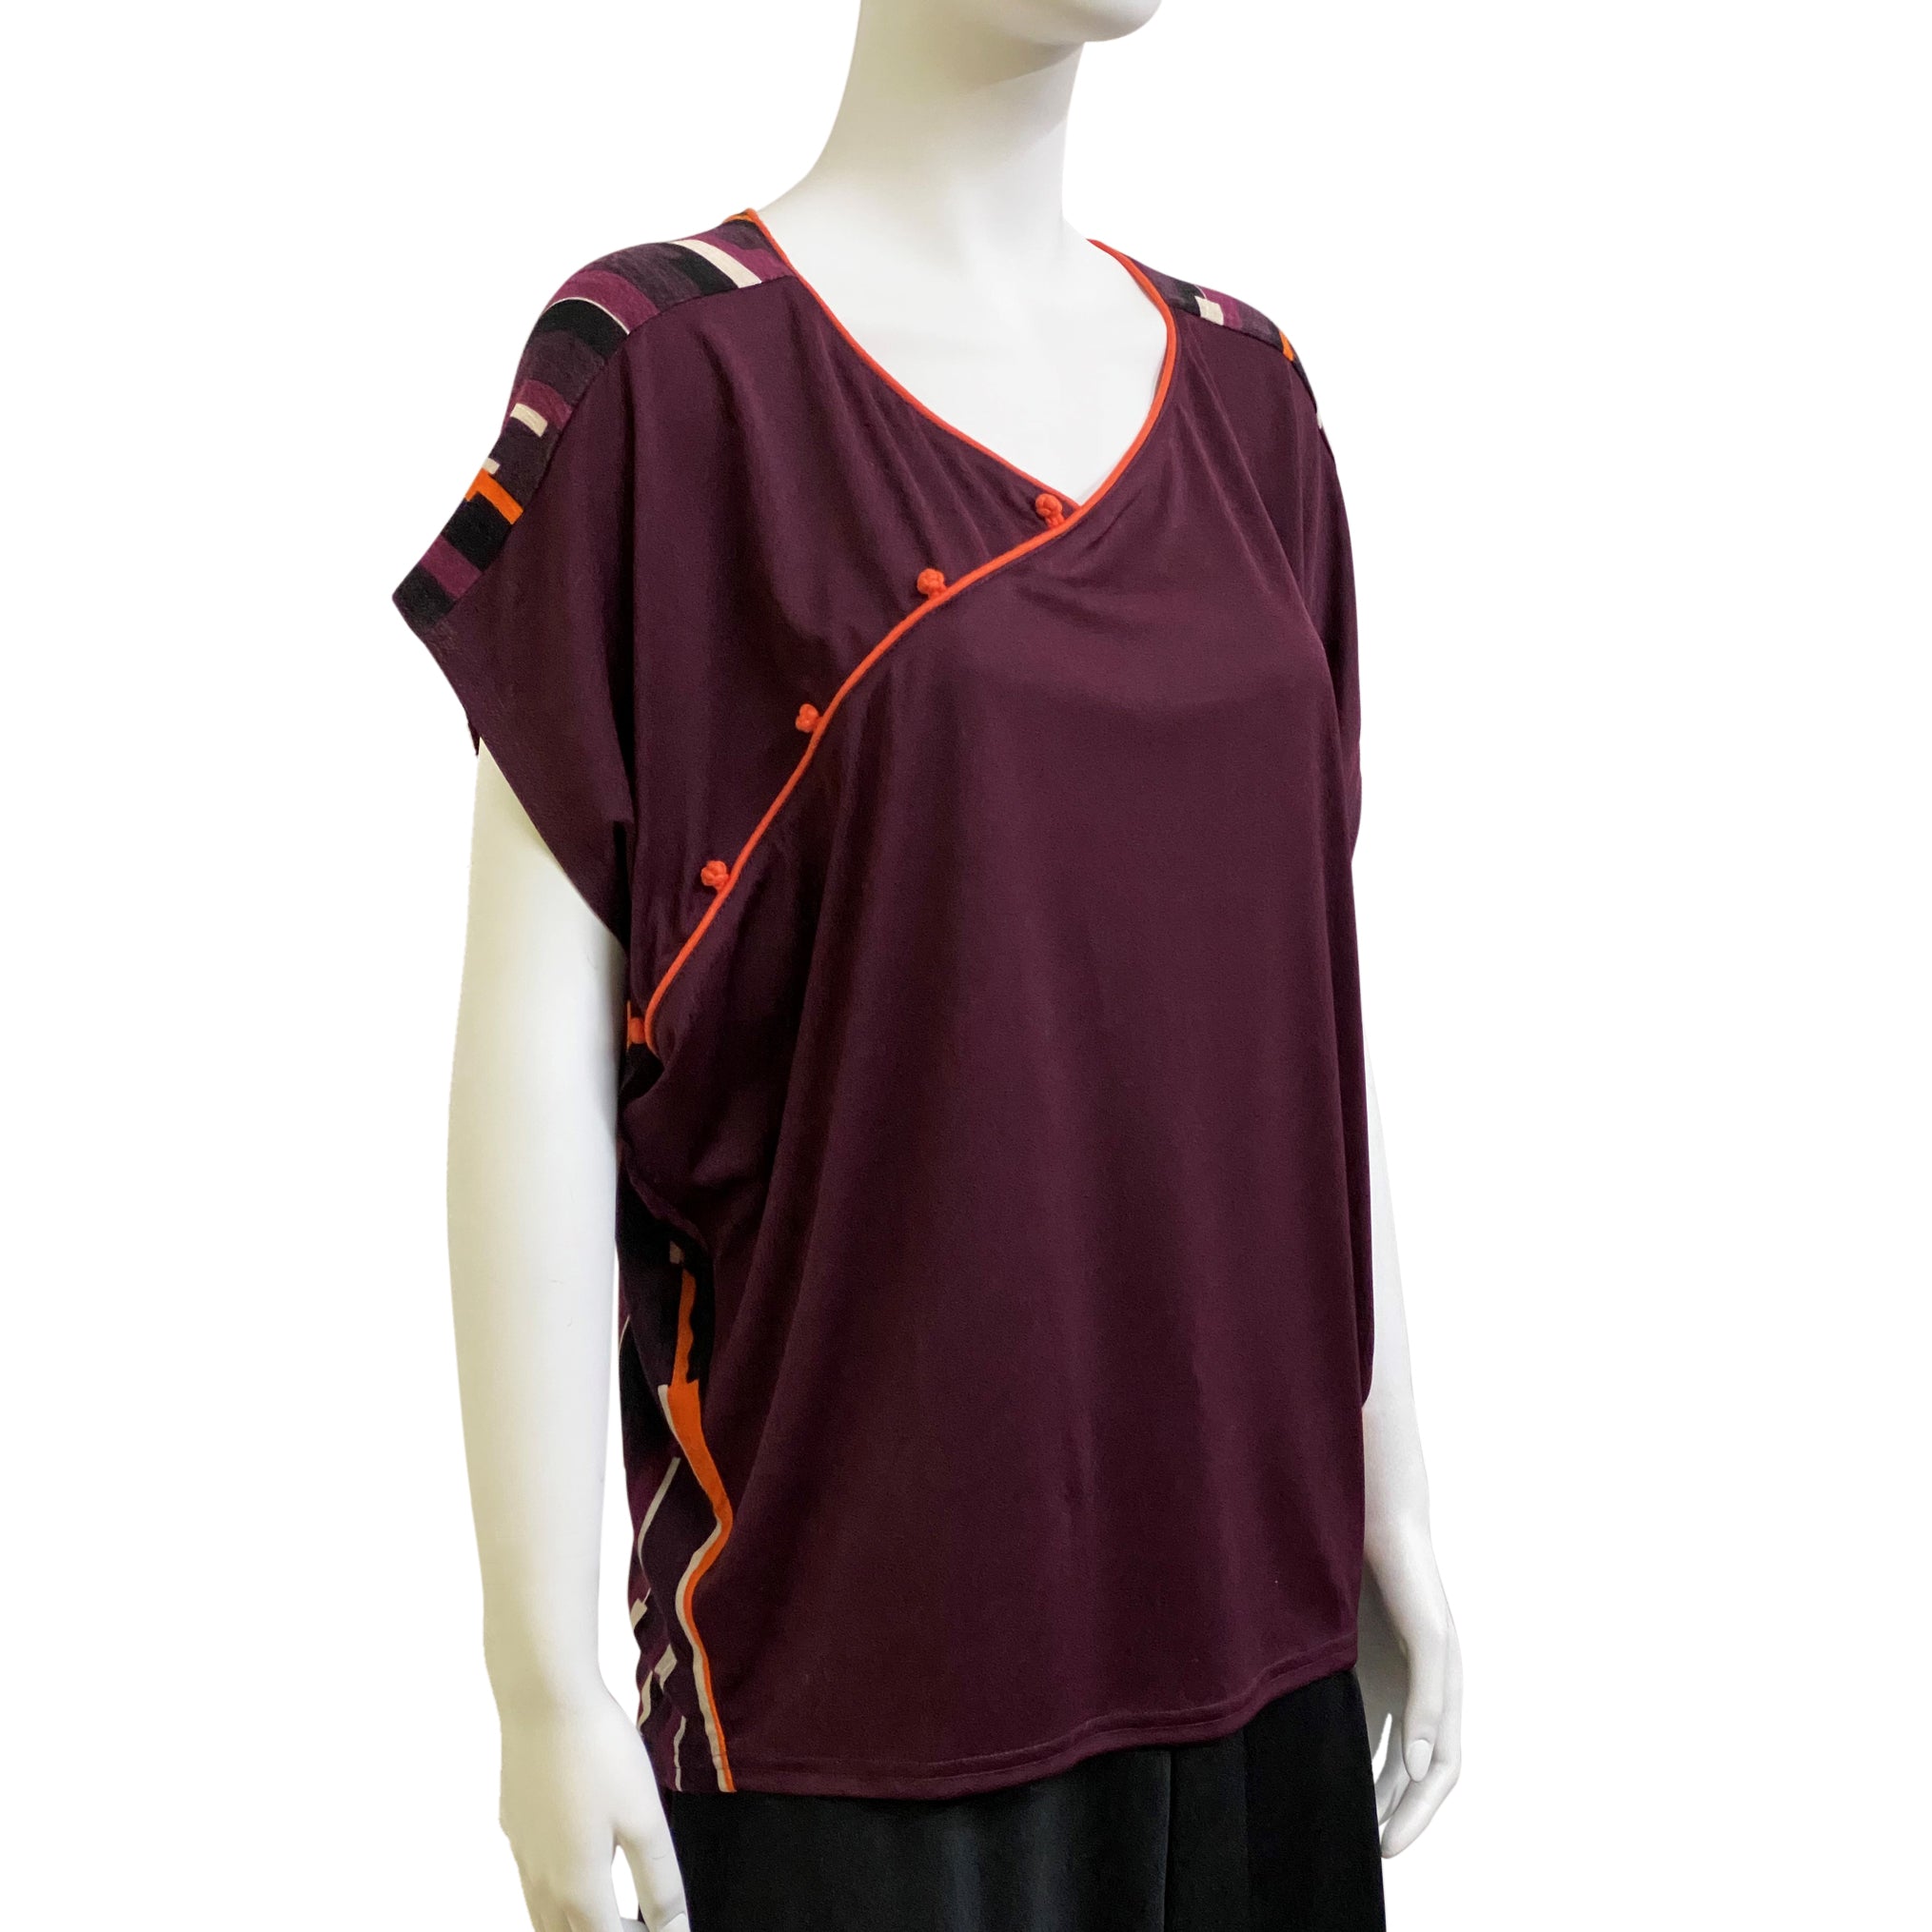 Wing Top with Contrast Buttons, Burgundy / Orange Block